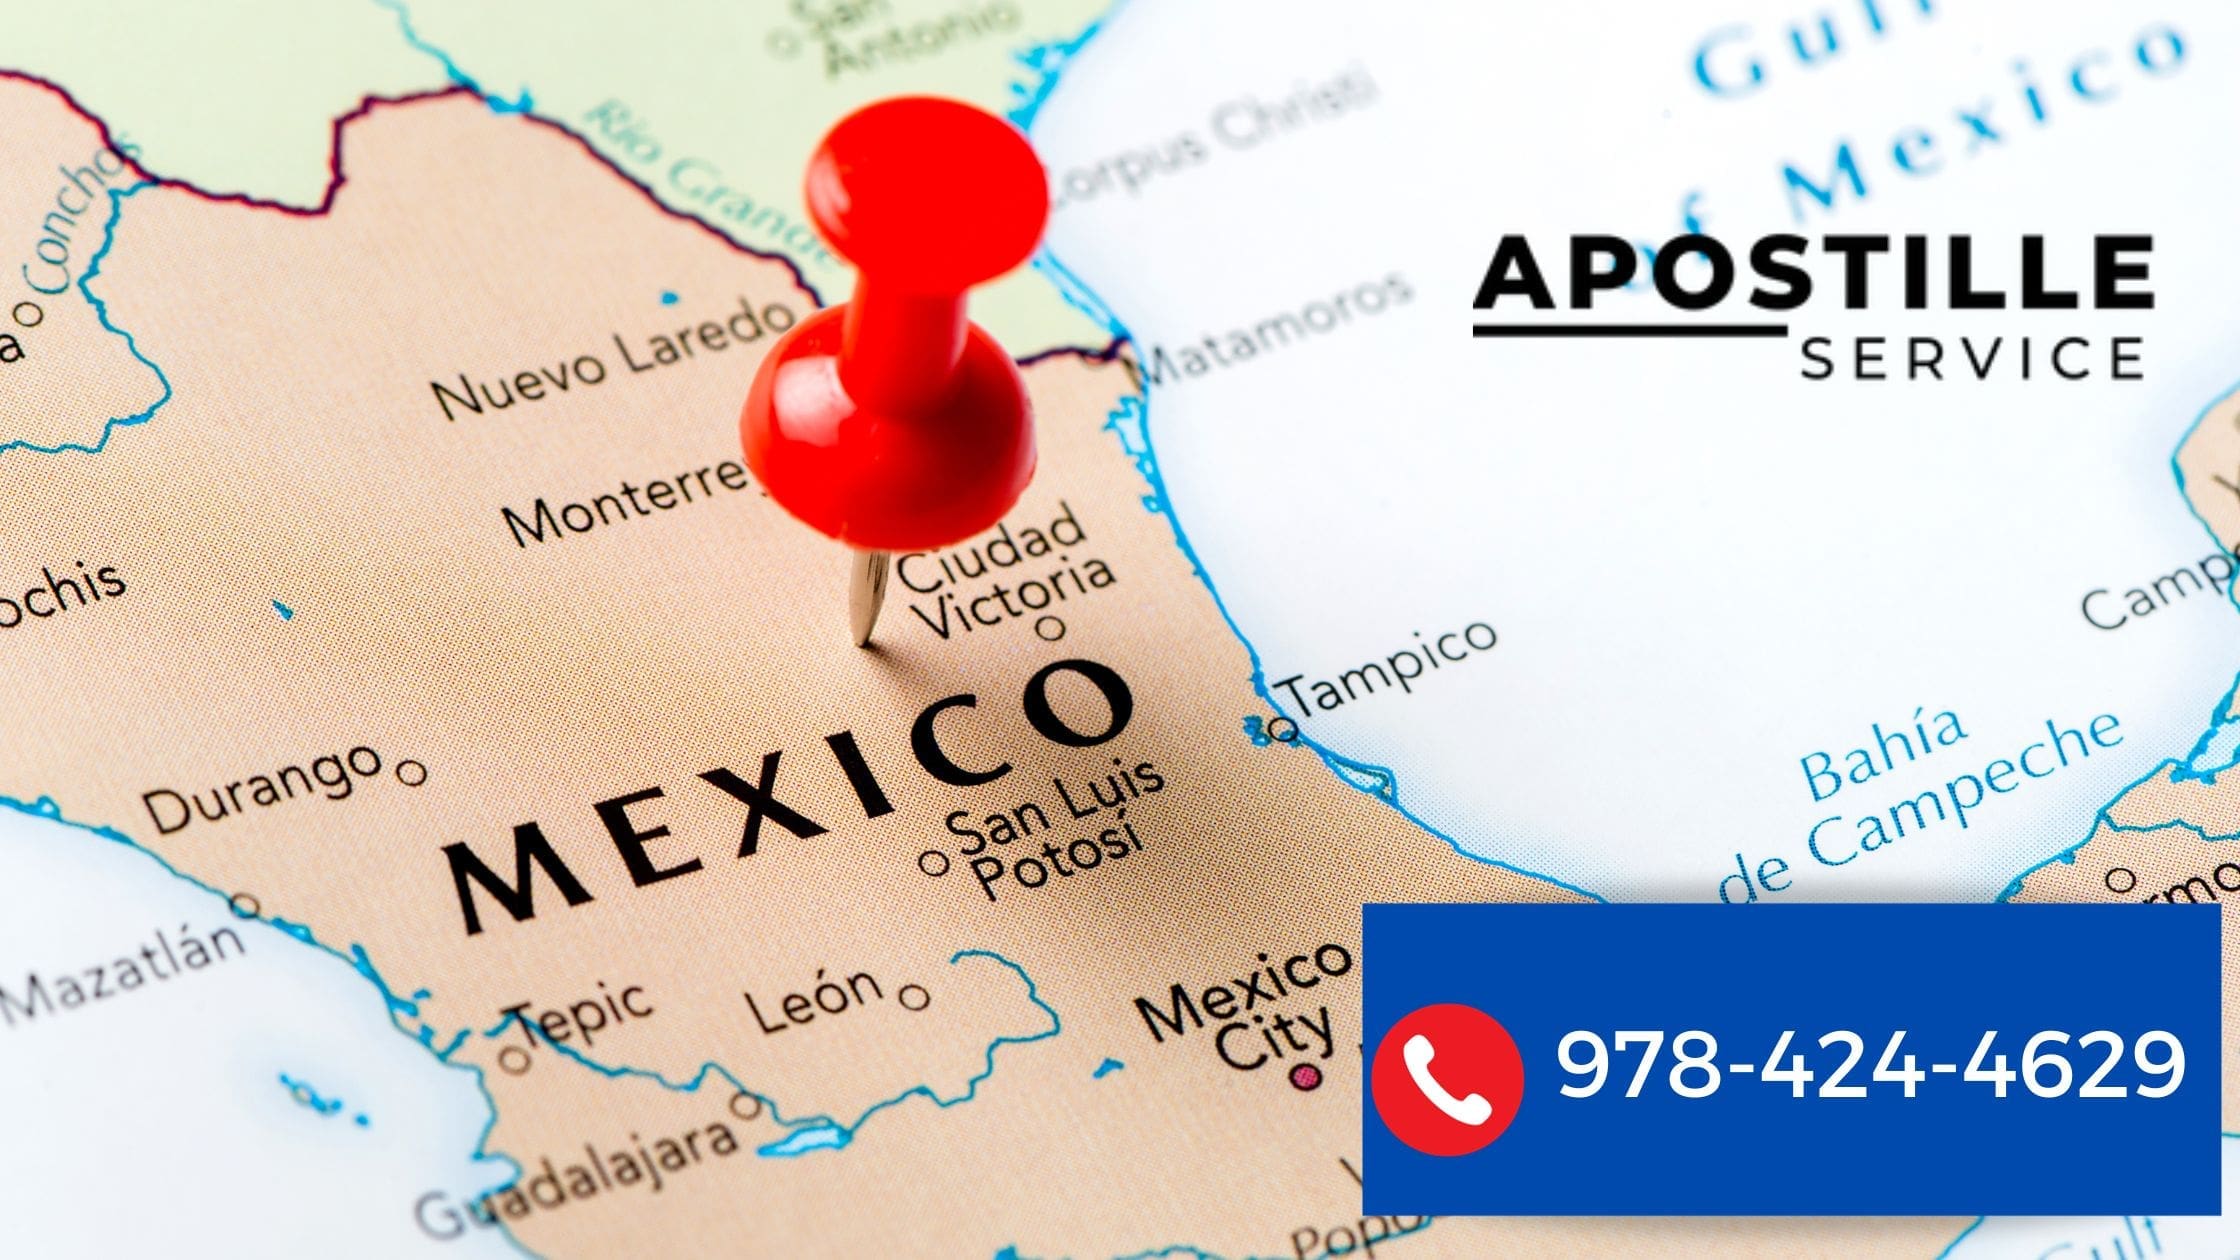 Apostille Service To Mexico From Boston MA